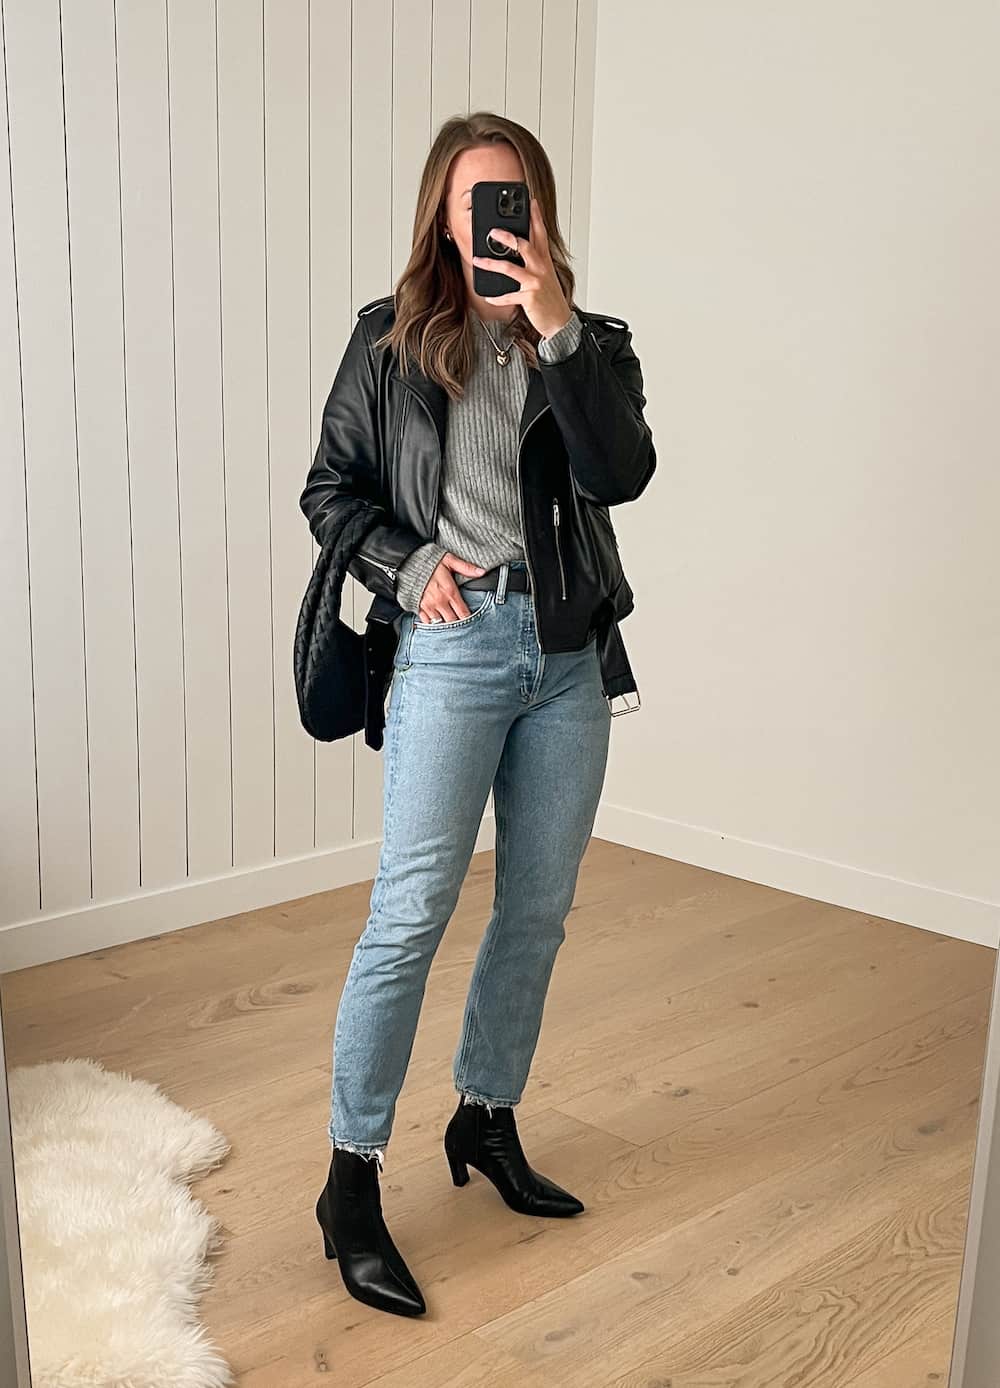 Christal wearing straight jeans with black booties and a grey sweater under a leather jacket.